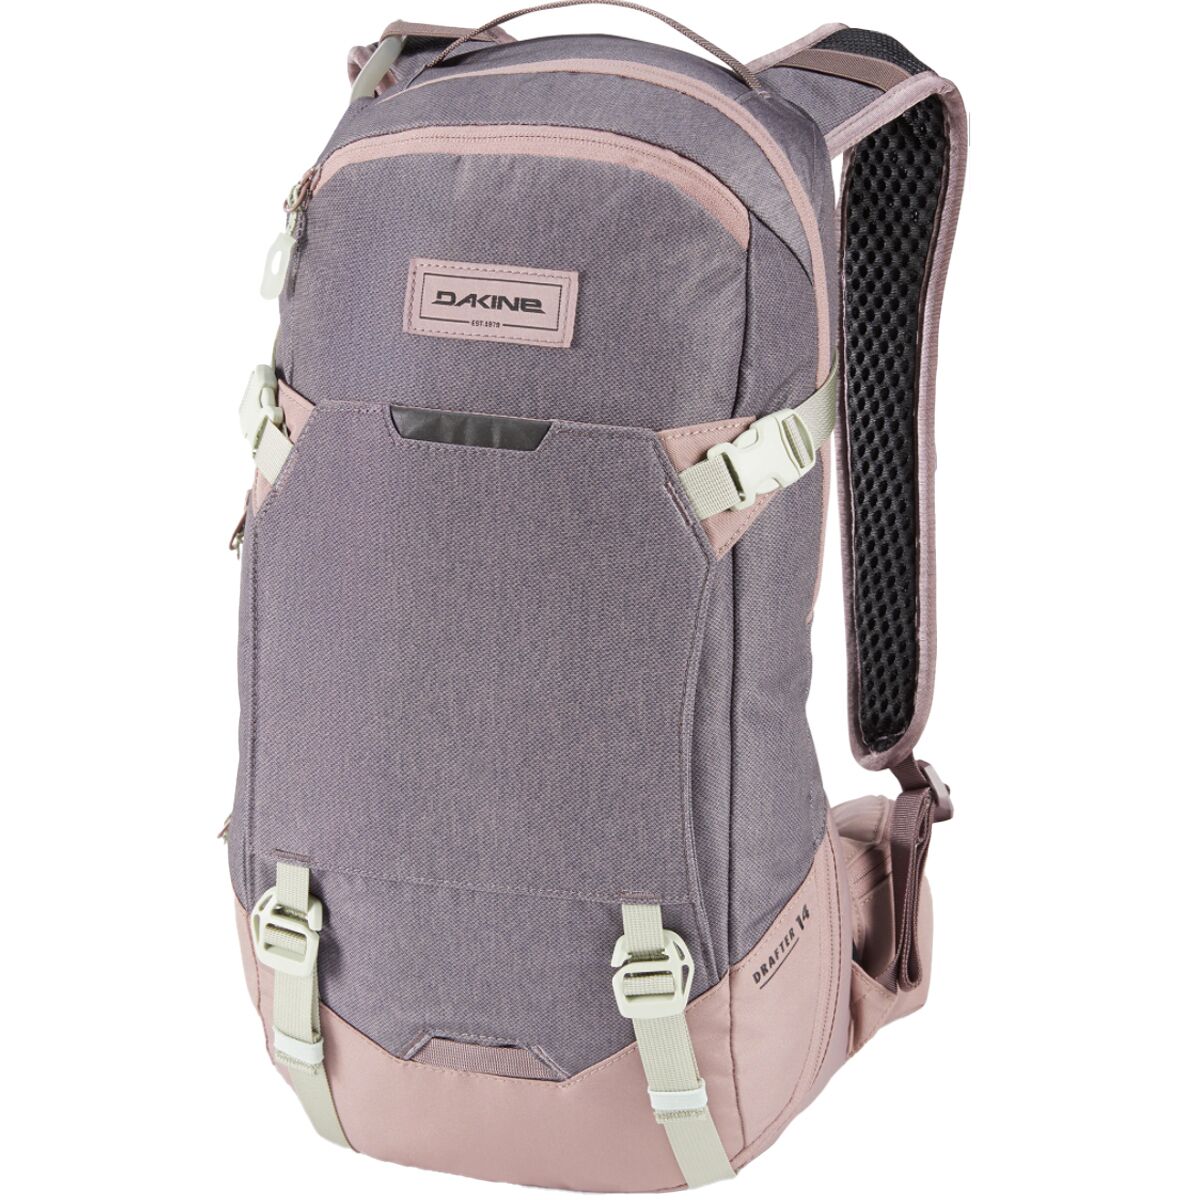 Drafter 14L Hydration Pack - Women